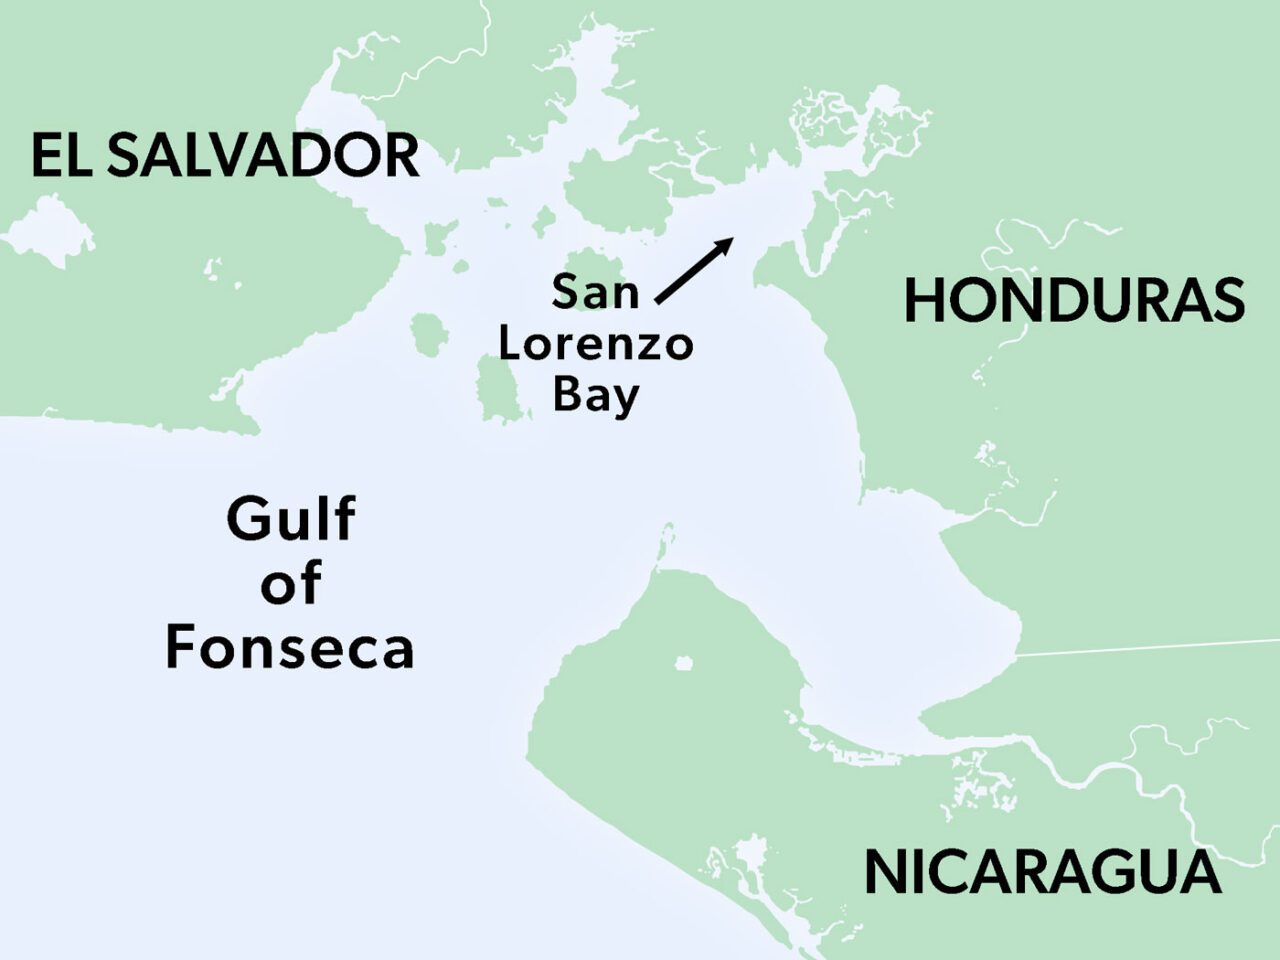 Close up of Gulf of Fonseca with San Lorenzo Bay indicated. Nearby countries noted are El Salvador, Honduras and Nicaragua.